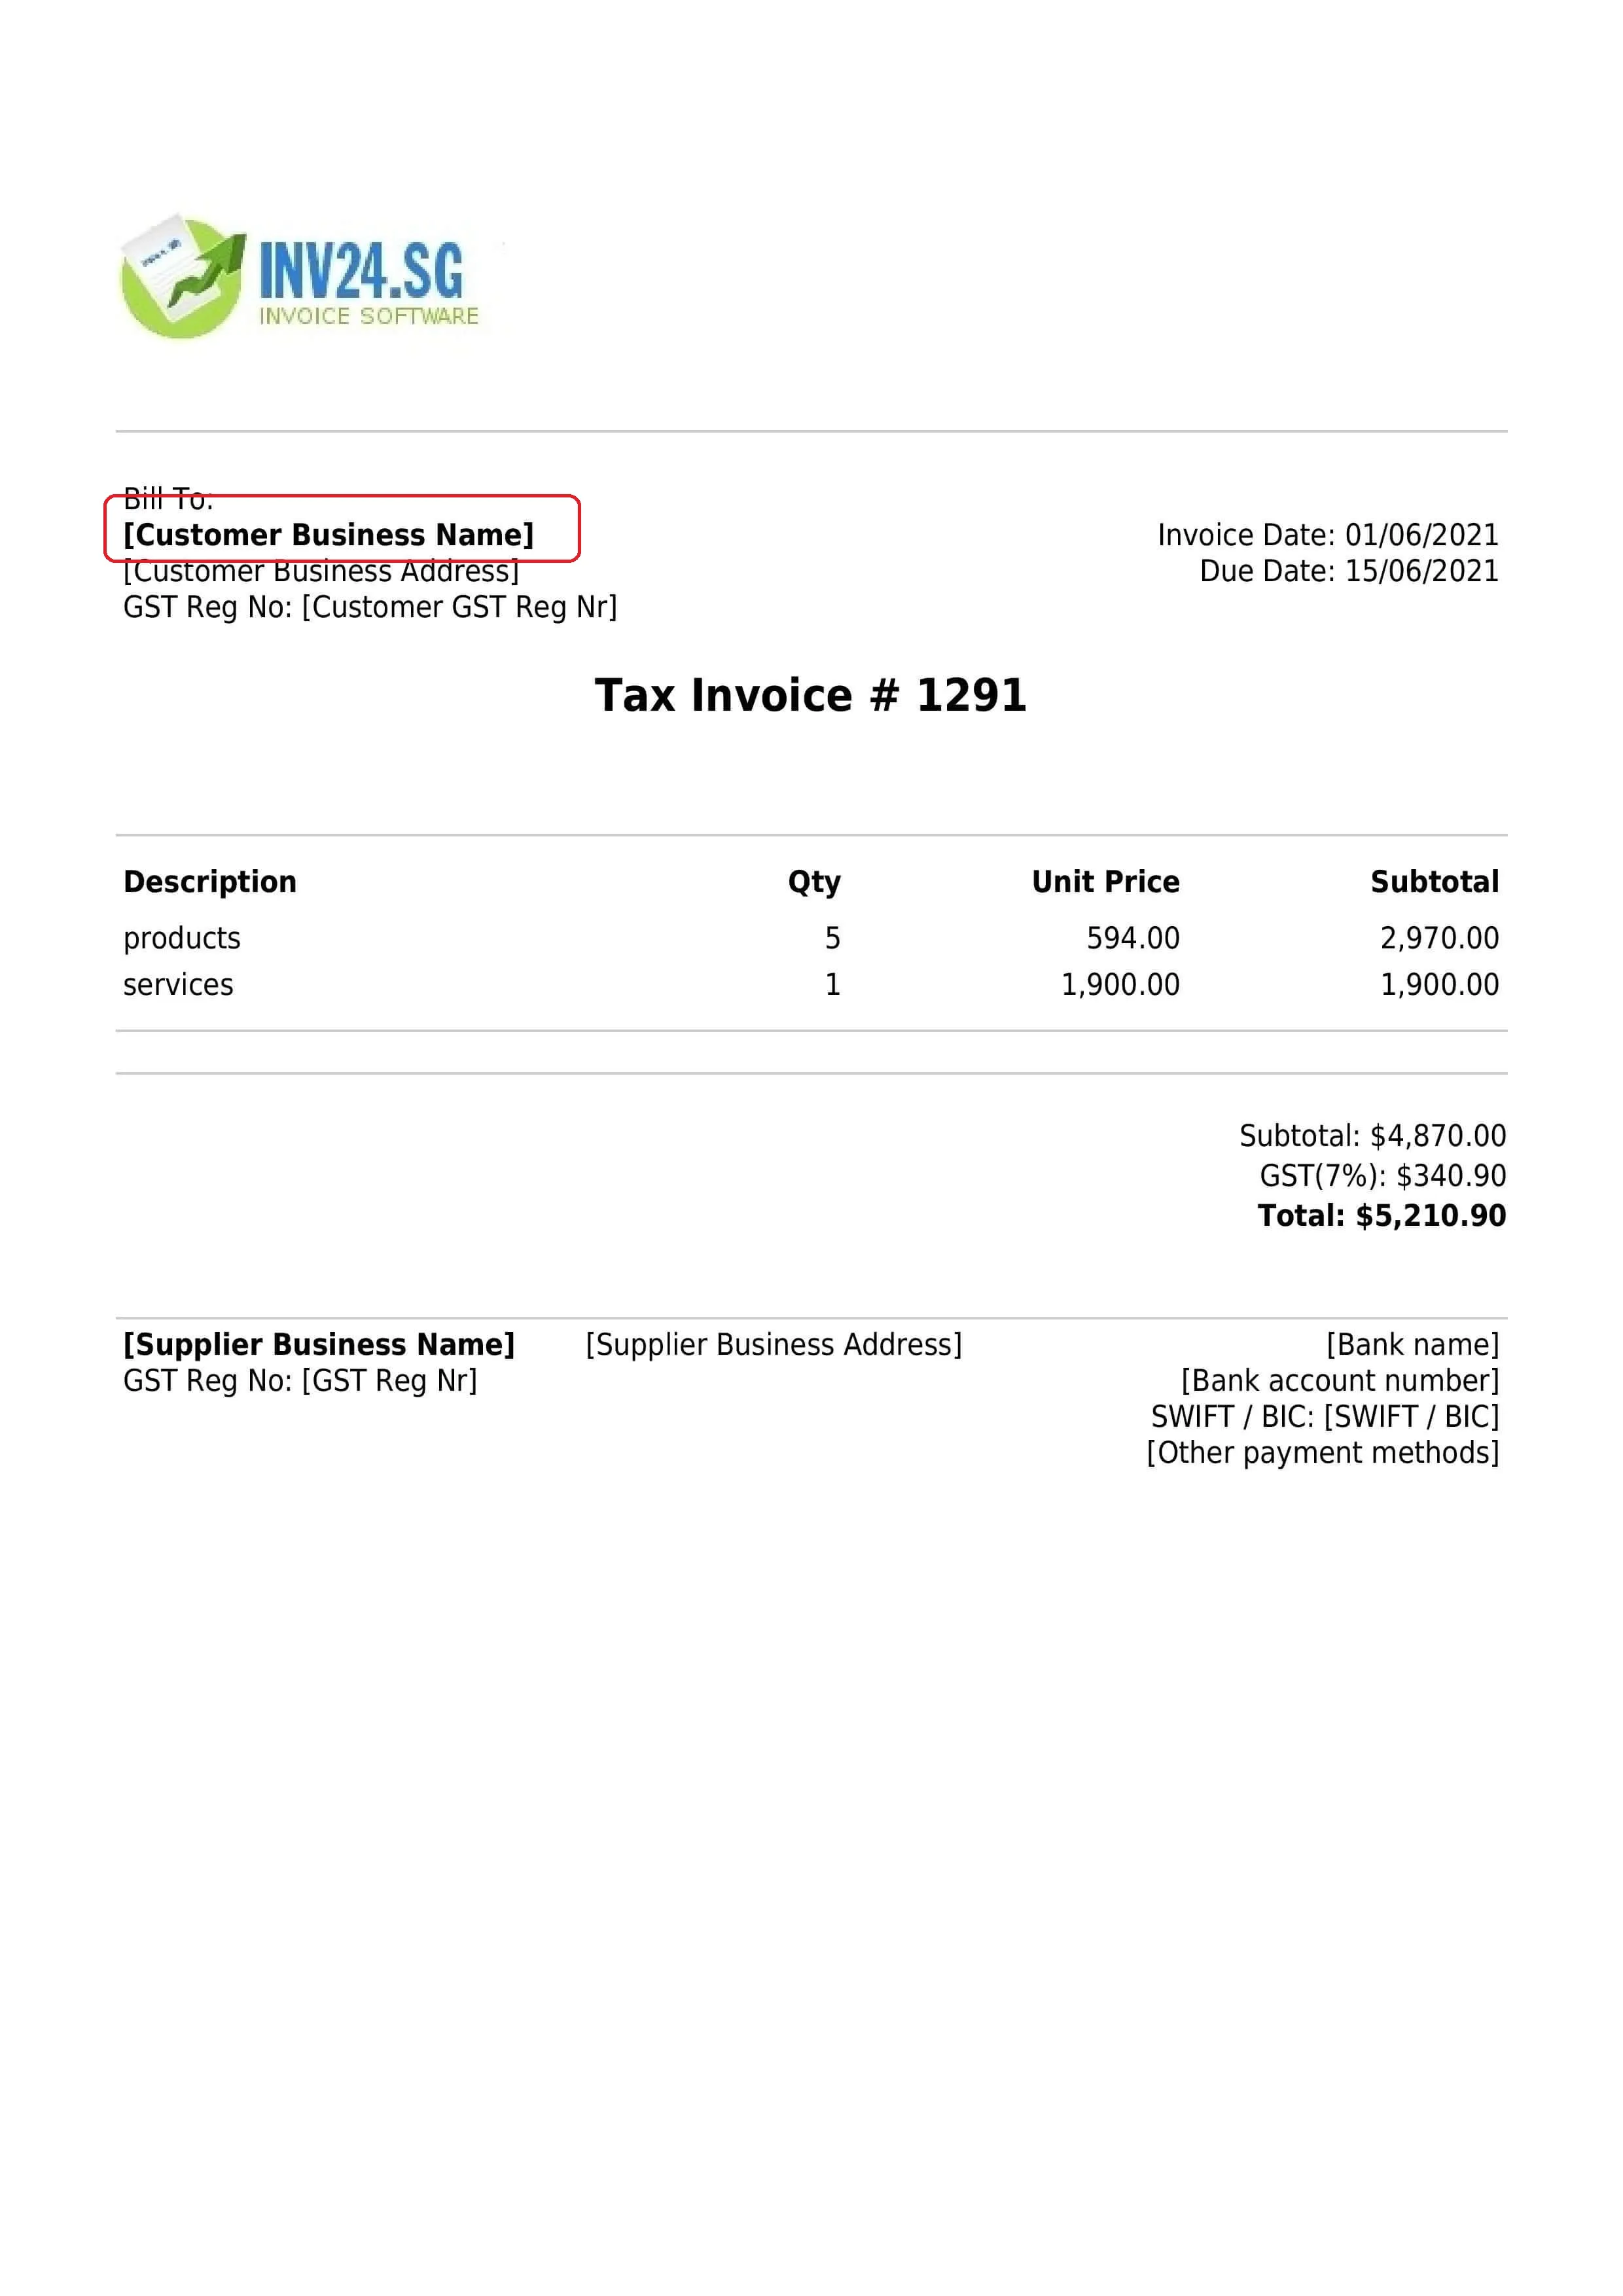 customers business name on the invoice